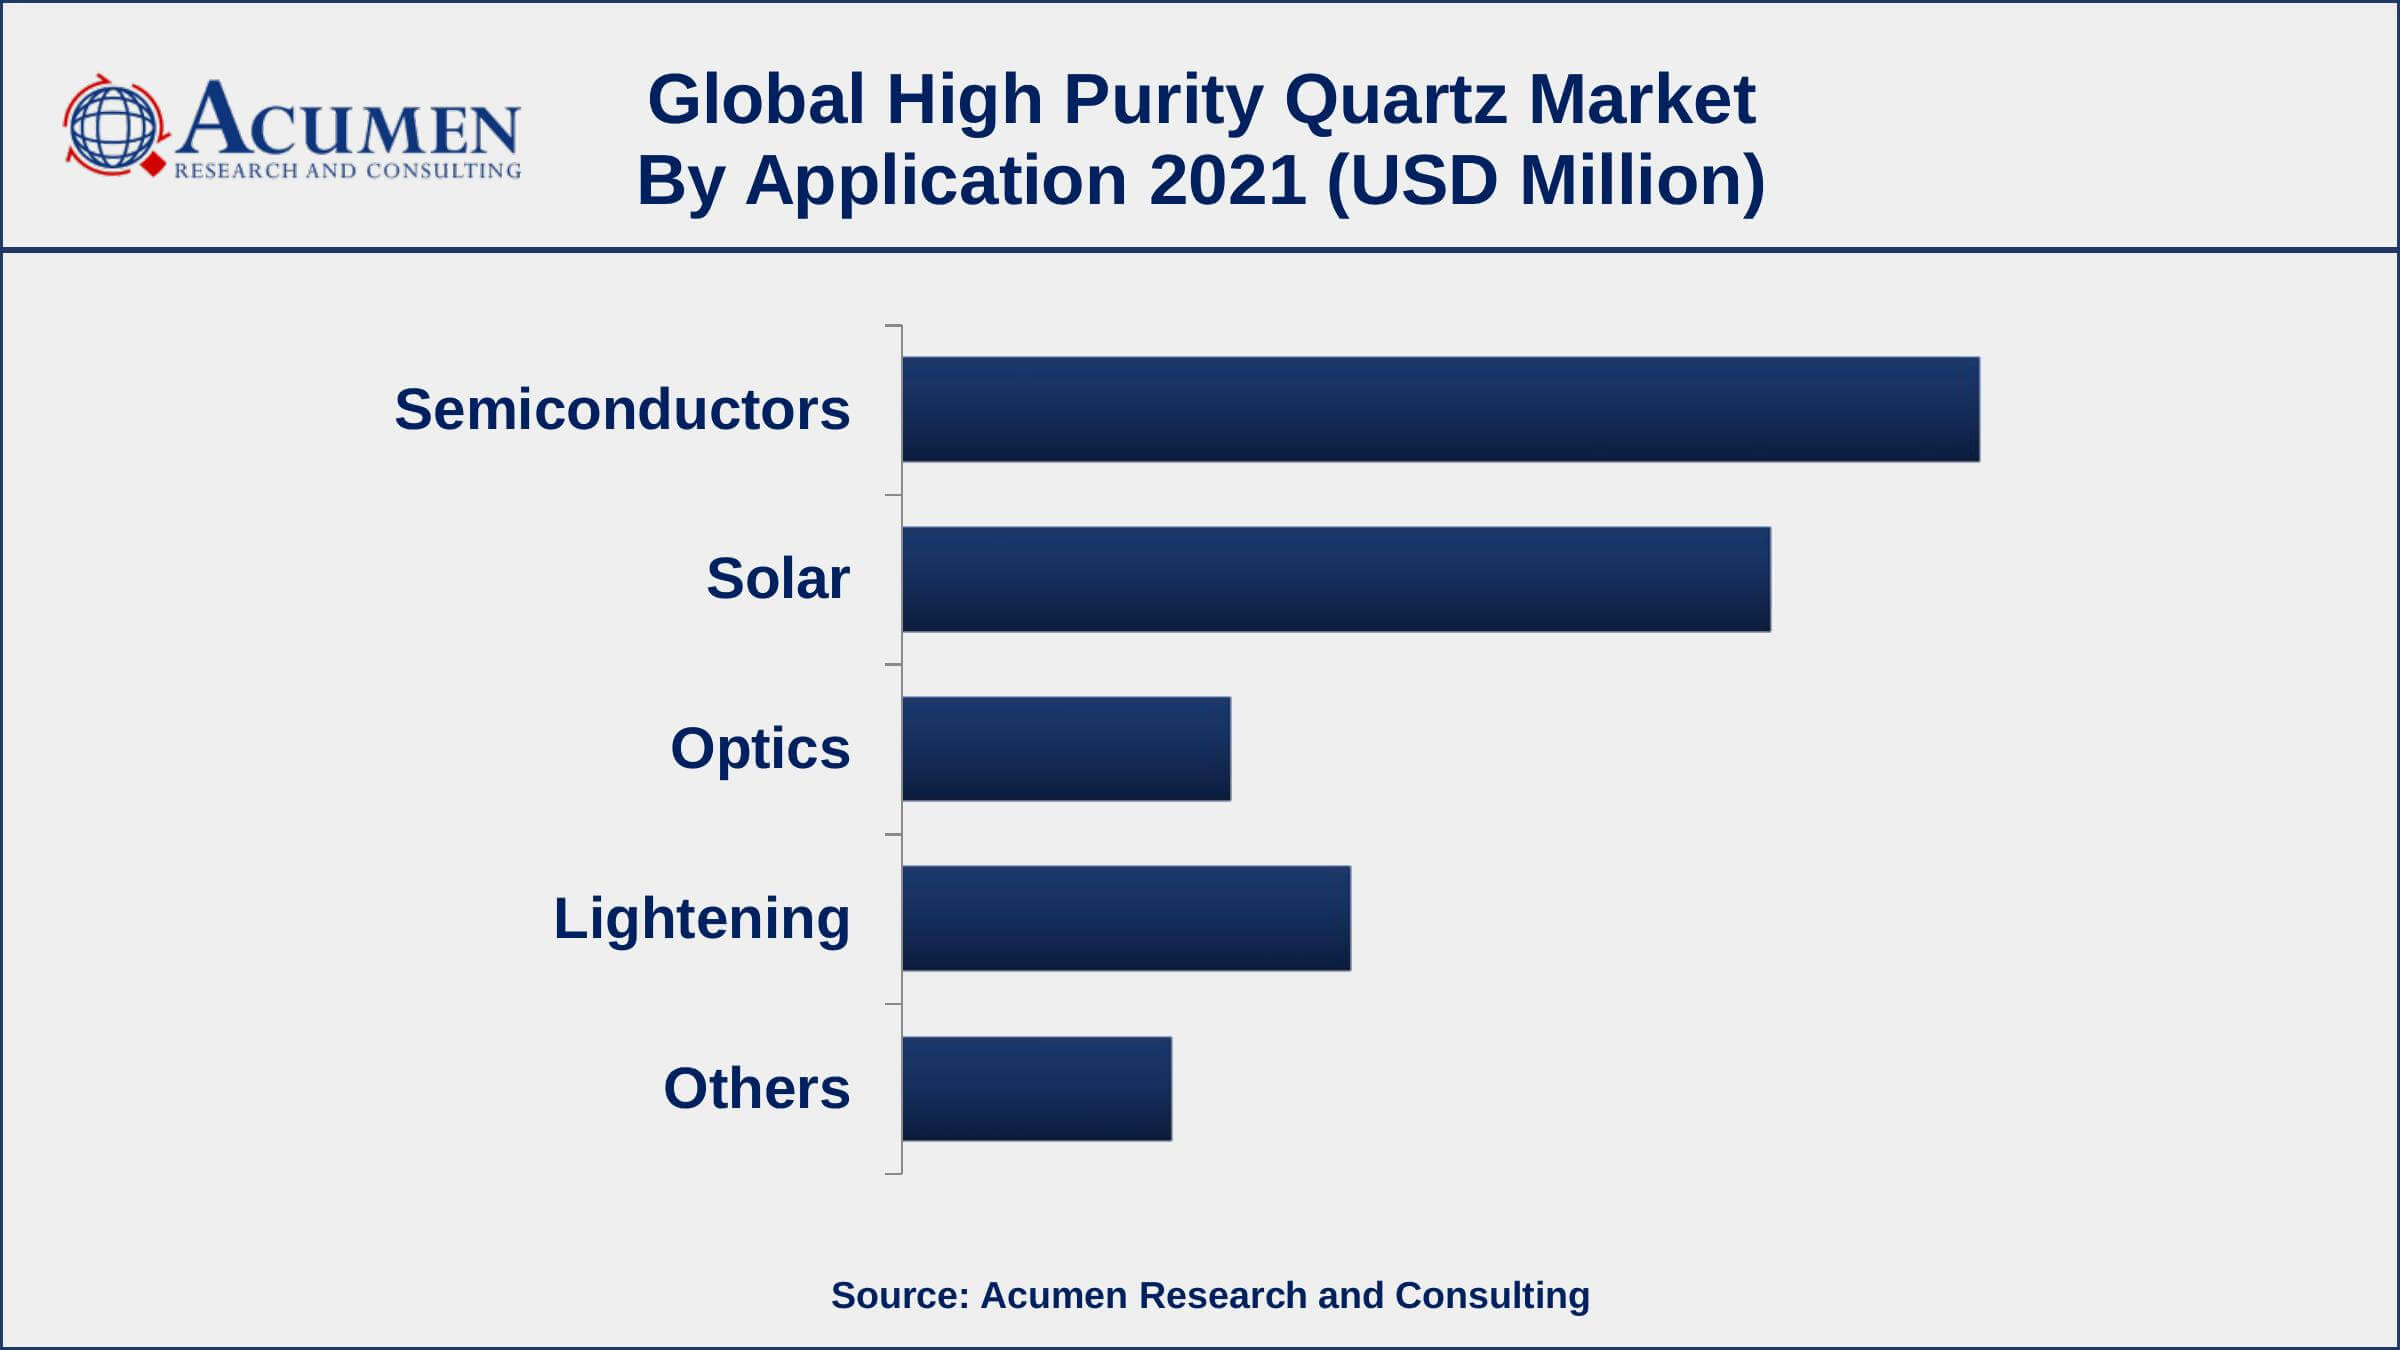 Among application, optical segment is expected to grow at a CAGR of 6.7% from 2022 to 2030